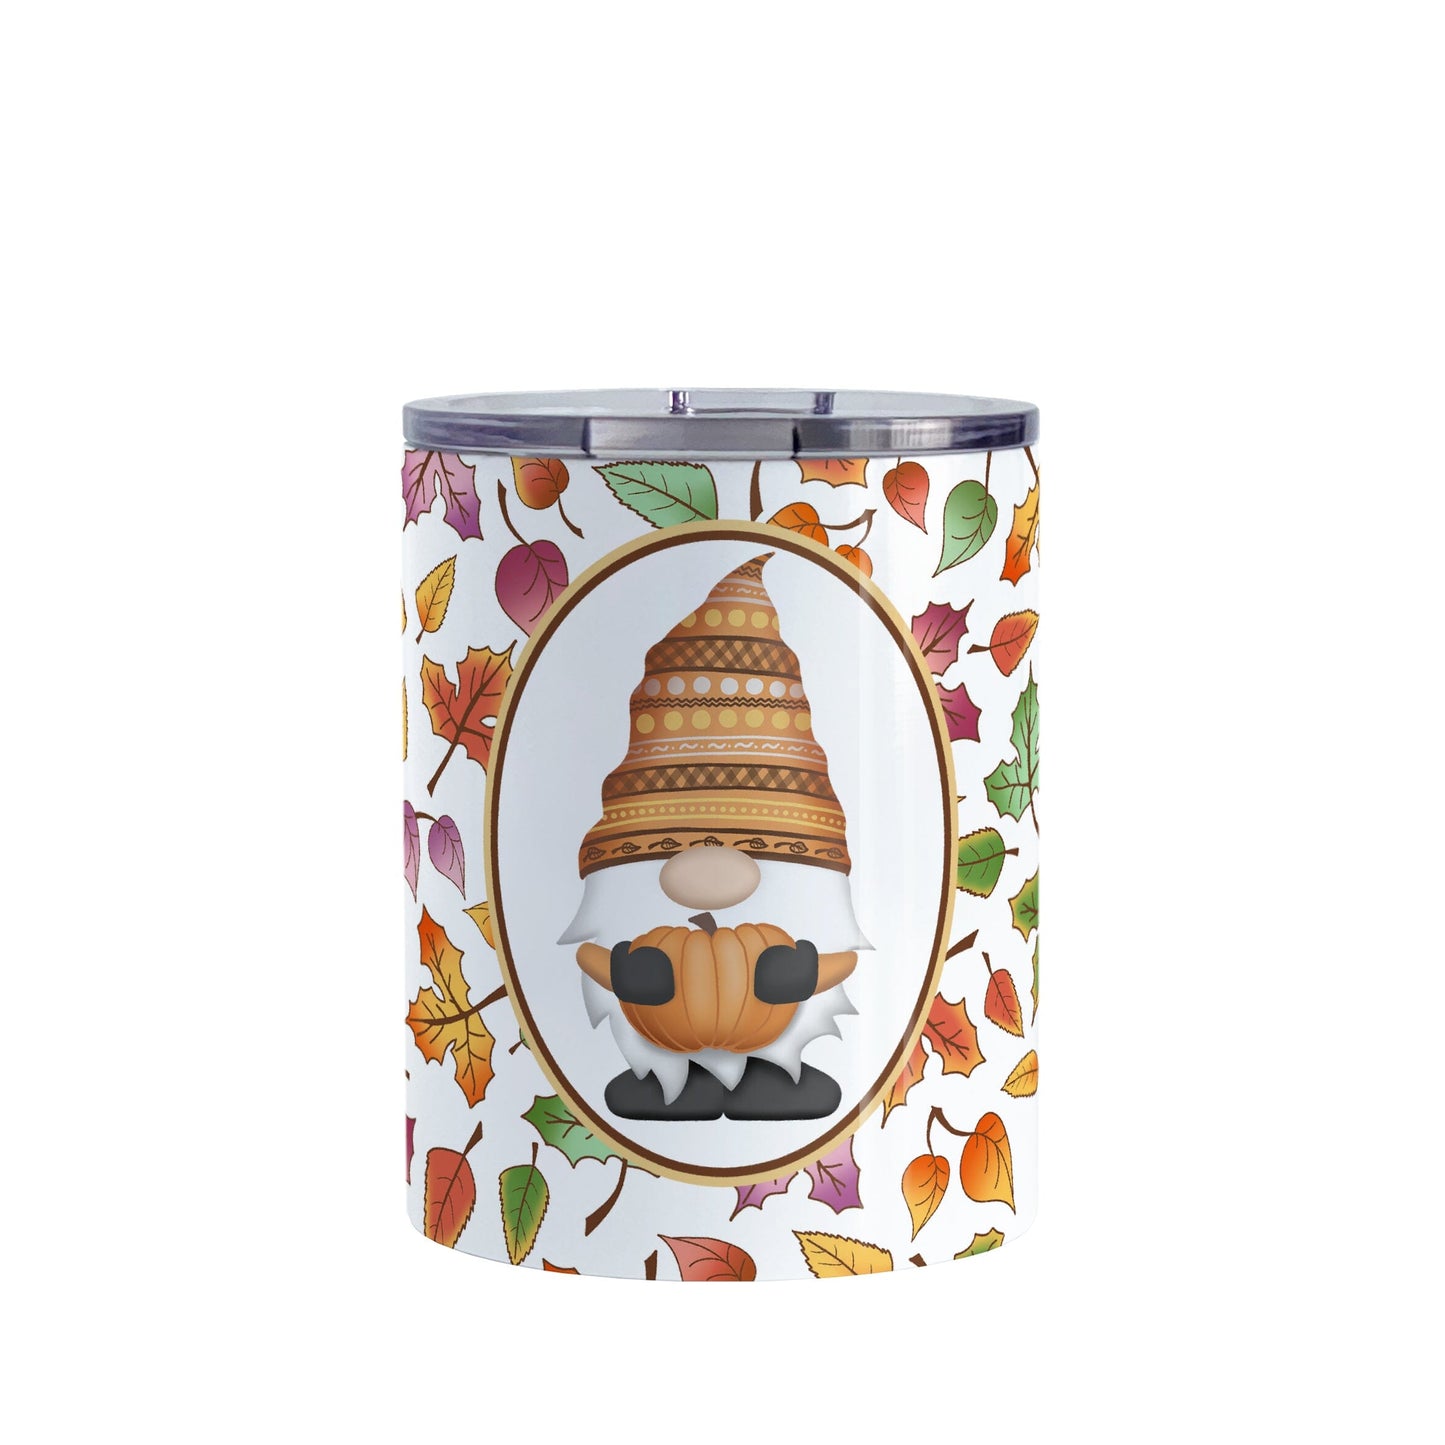 Orange Gnome Fall Leaves Tumbler Cup (10oz) at Amy's Coffee Mugs. A stainless steel tumbler cup designed with an adorable orange hat gnome holding an orange pumpkin in a white oval over a pattern of leaves in different fall colors that wrap around the cup. 